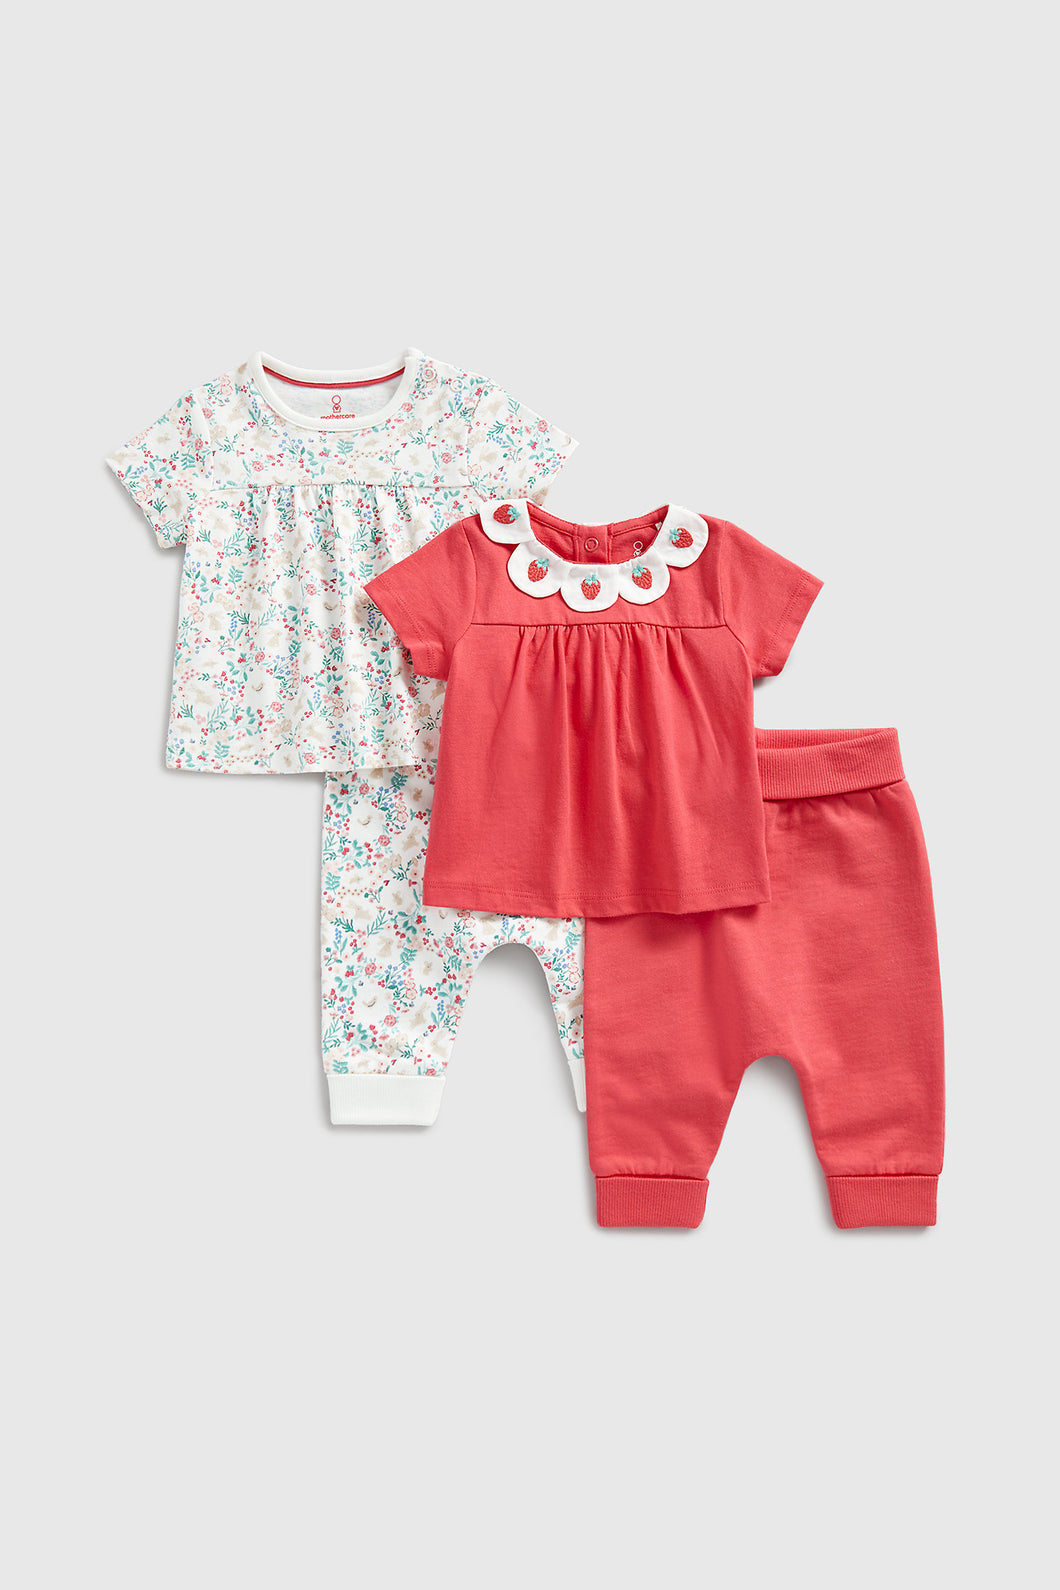 Mothercare T-Shirts and Joggers - 4 Piece